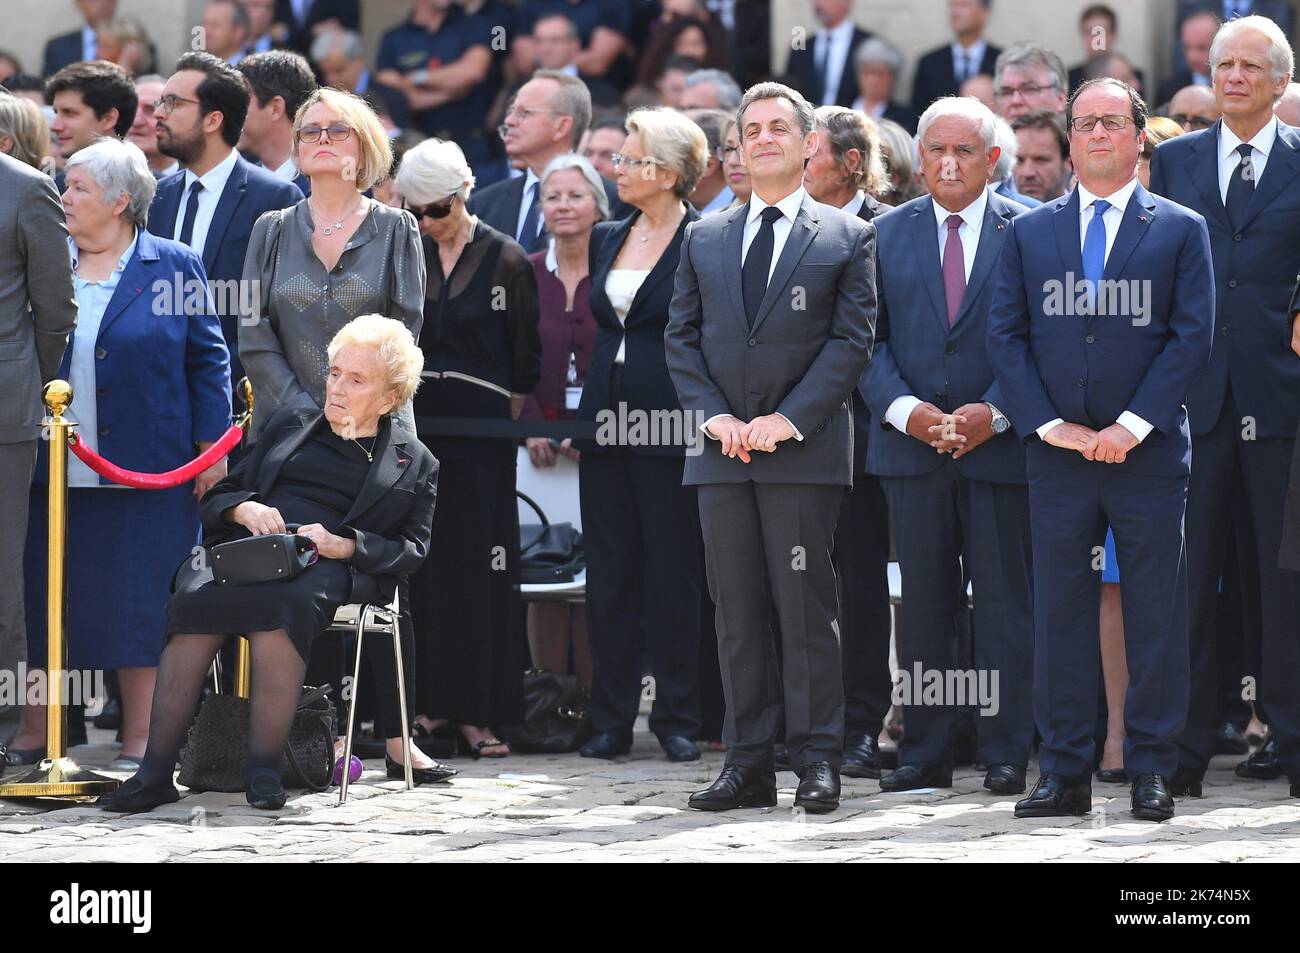 Bernadette et Claude Chirac Nicolas Sarkozy Francois Hollande during the funeral ceremony for Simone Veil, in the courtyard of the Invalides in Paris, France, 05 July 2017. Holocaust survivors are joining France's president and European dignitaries at a special memorial ceremony for Simone Veil, who rose from the horrors of Nazi death camps to become president of the European Parliament and one of France's most revered politicians LTG Stock Photo